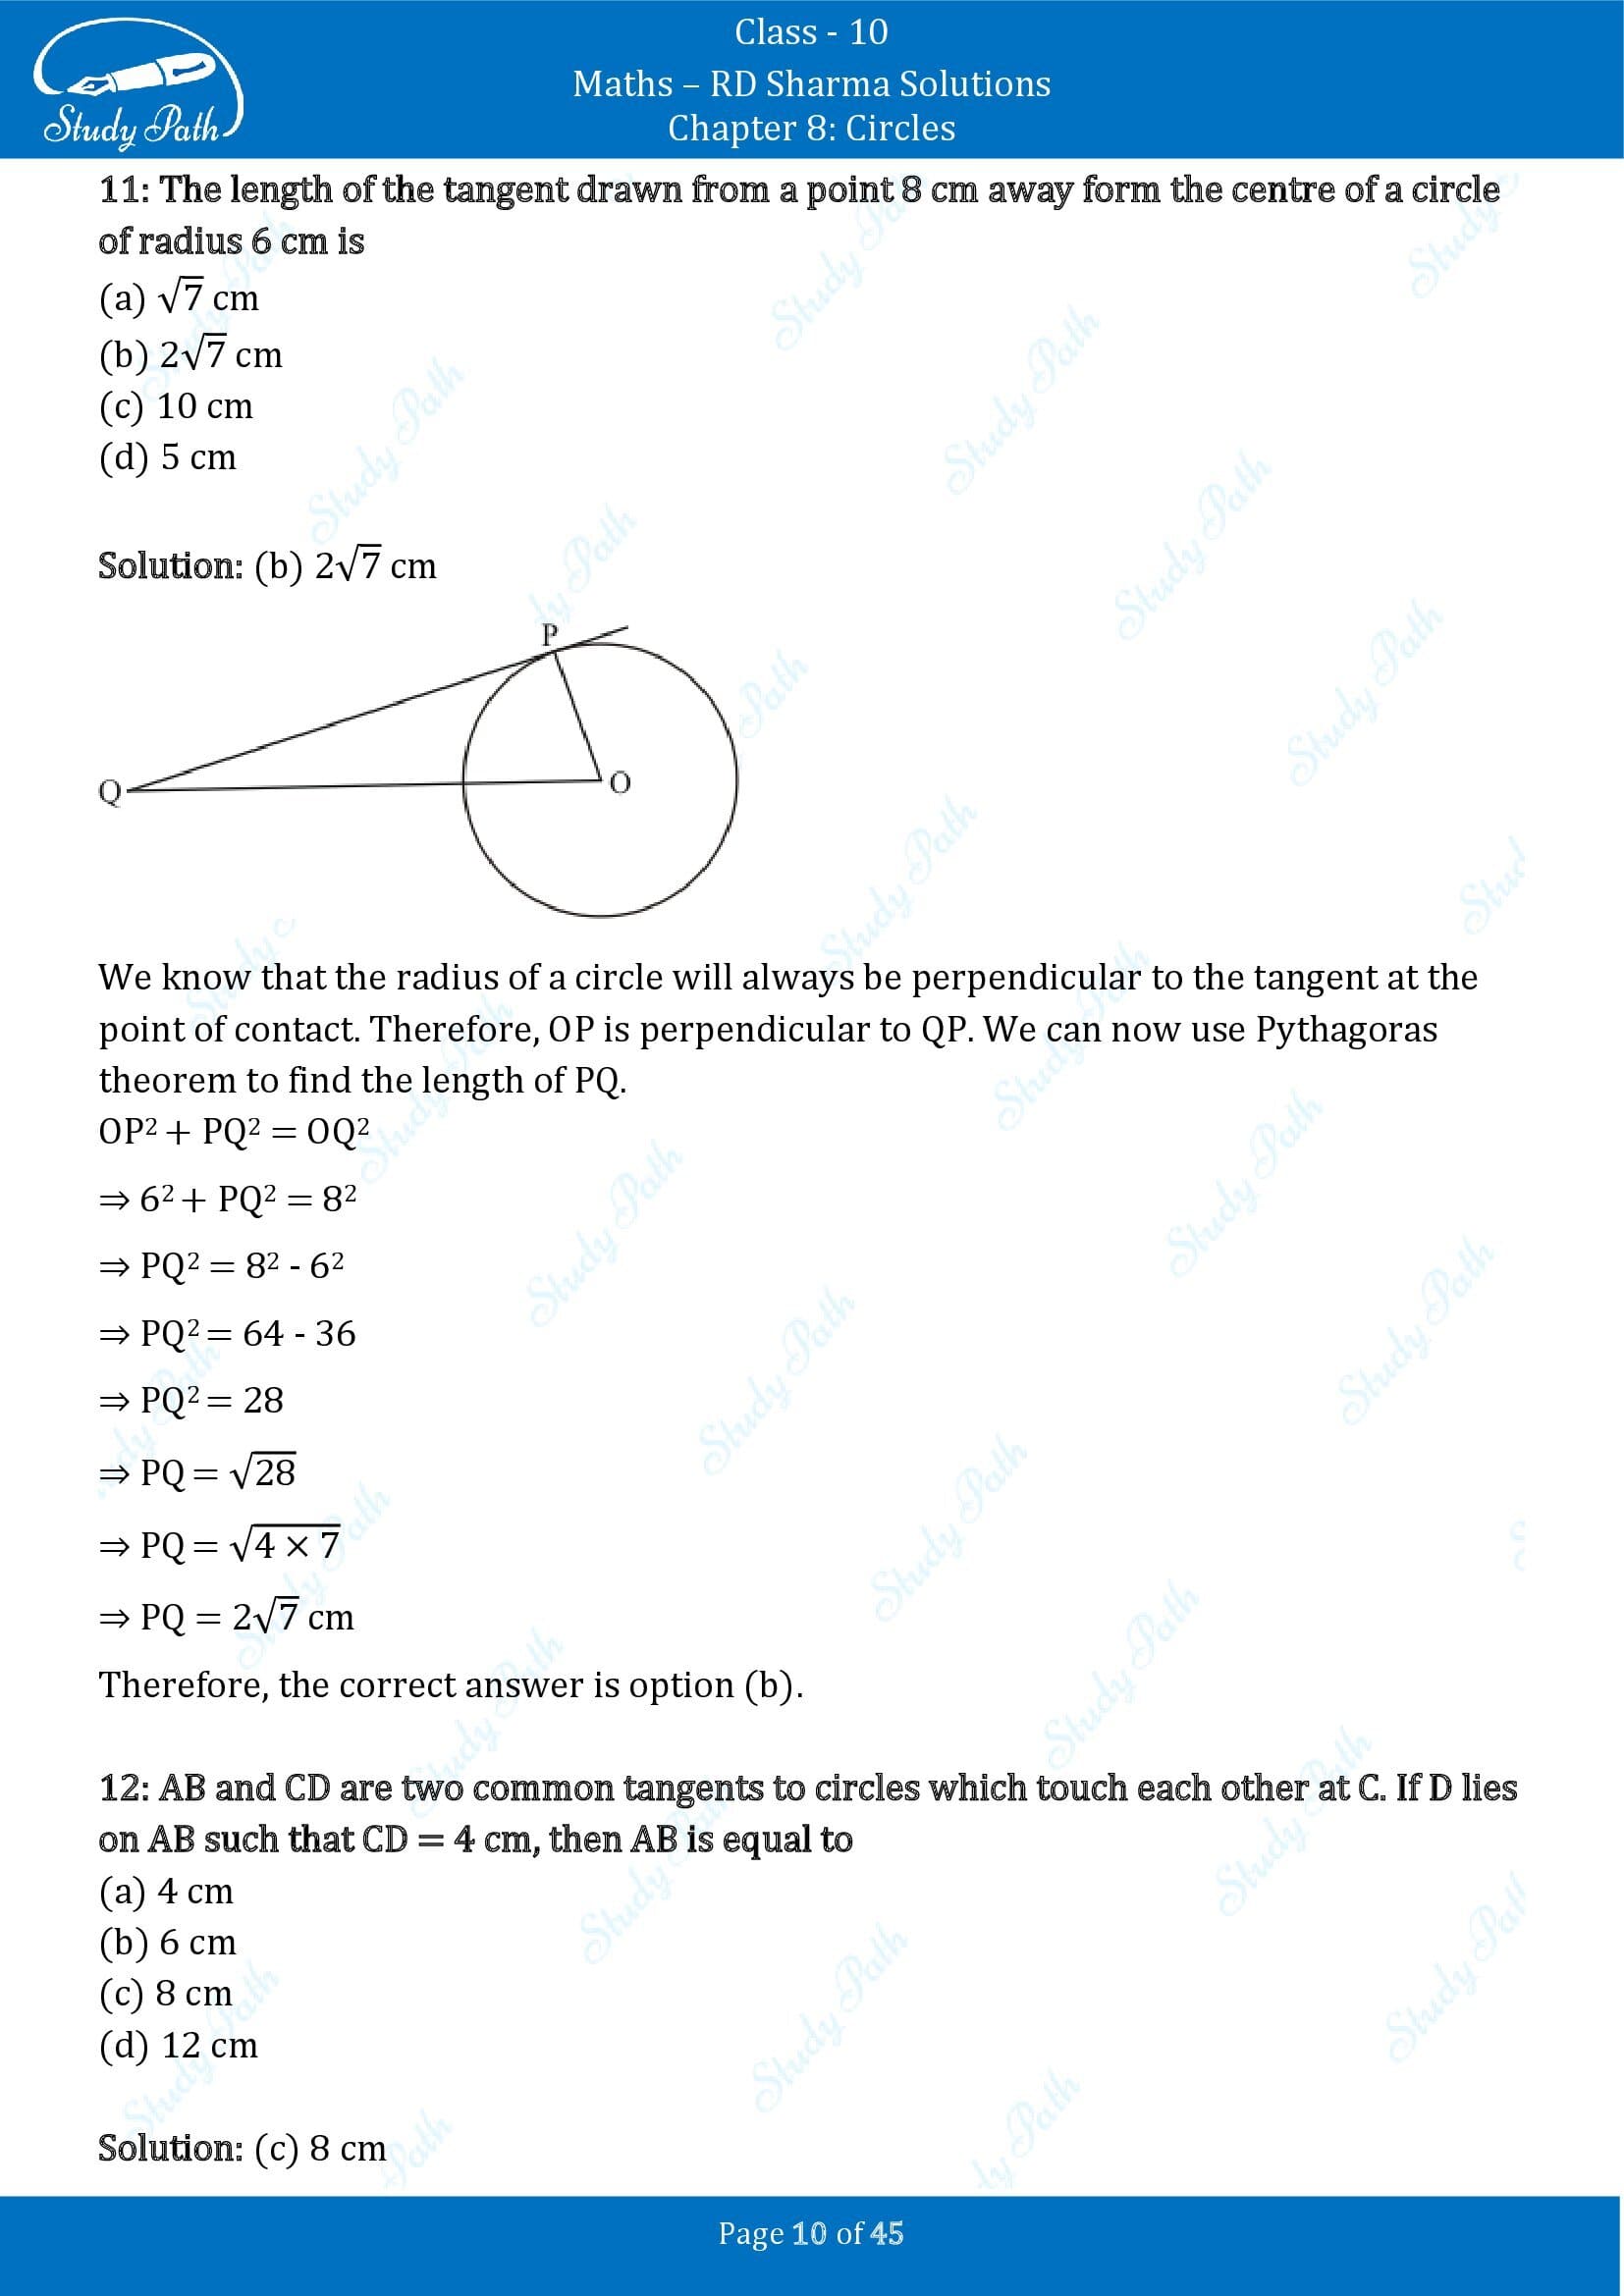 RD Sharma Solutions Class 10 Chapter 8 Circles Multiple Choice Questions MCQs 00010